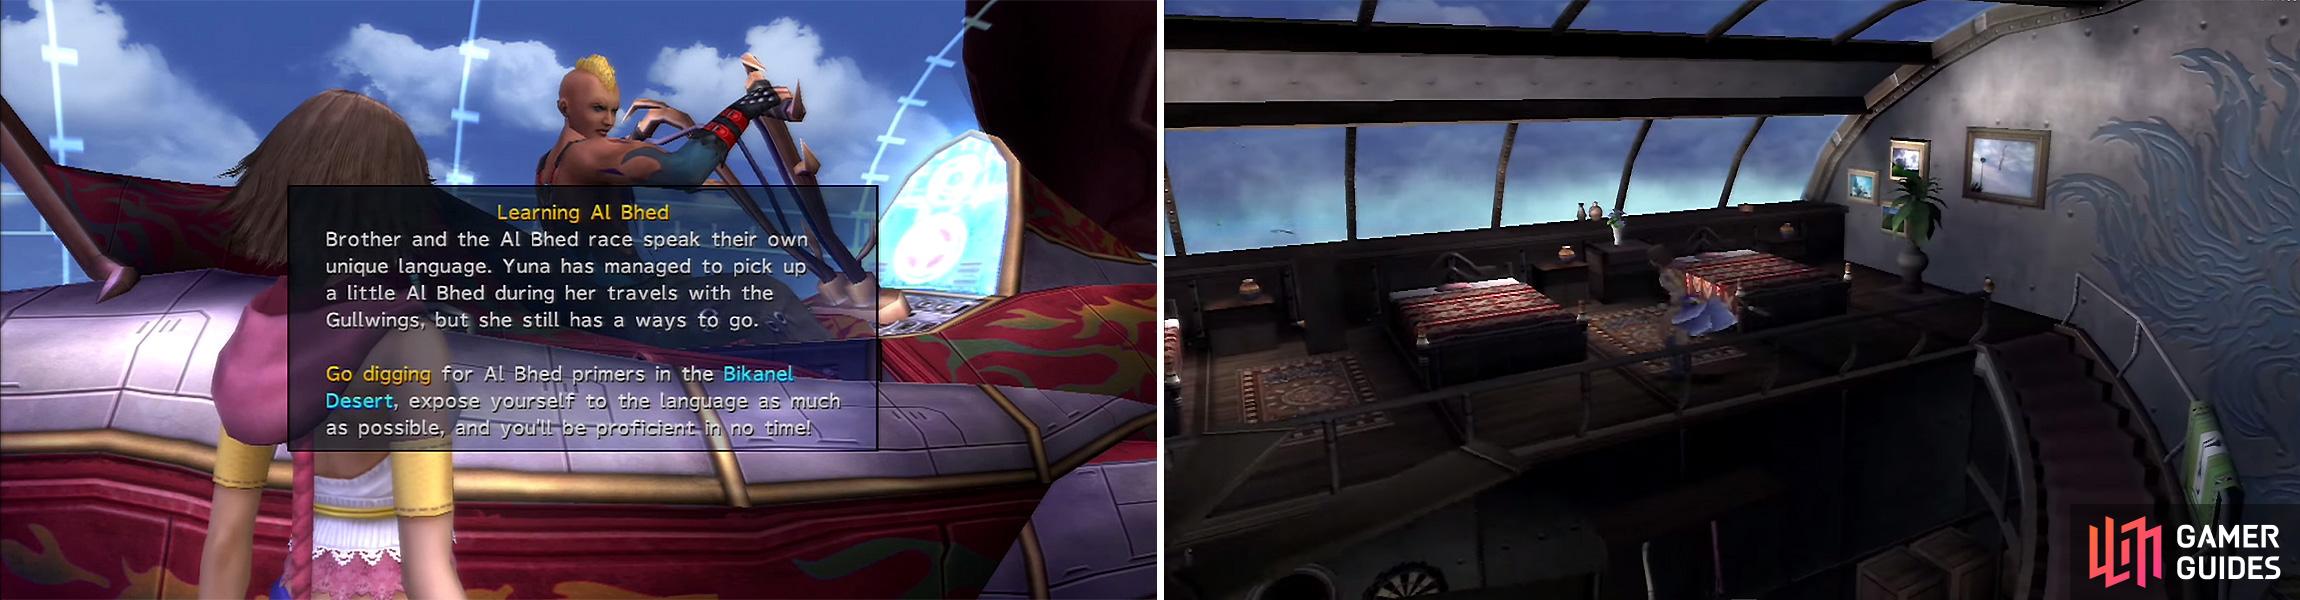 You can learn Al Bhed (left) just like FFX. Speaking to Brother nets you three Primers. Make sure to sleep in the cabin (right) in each chapter if you want 100% completion.